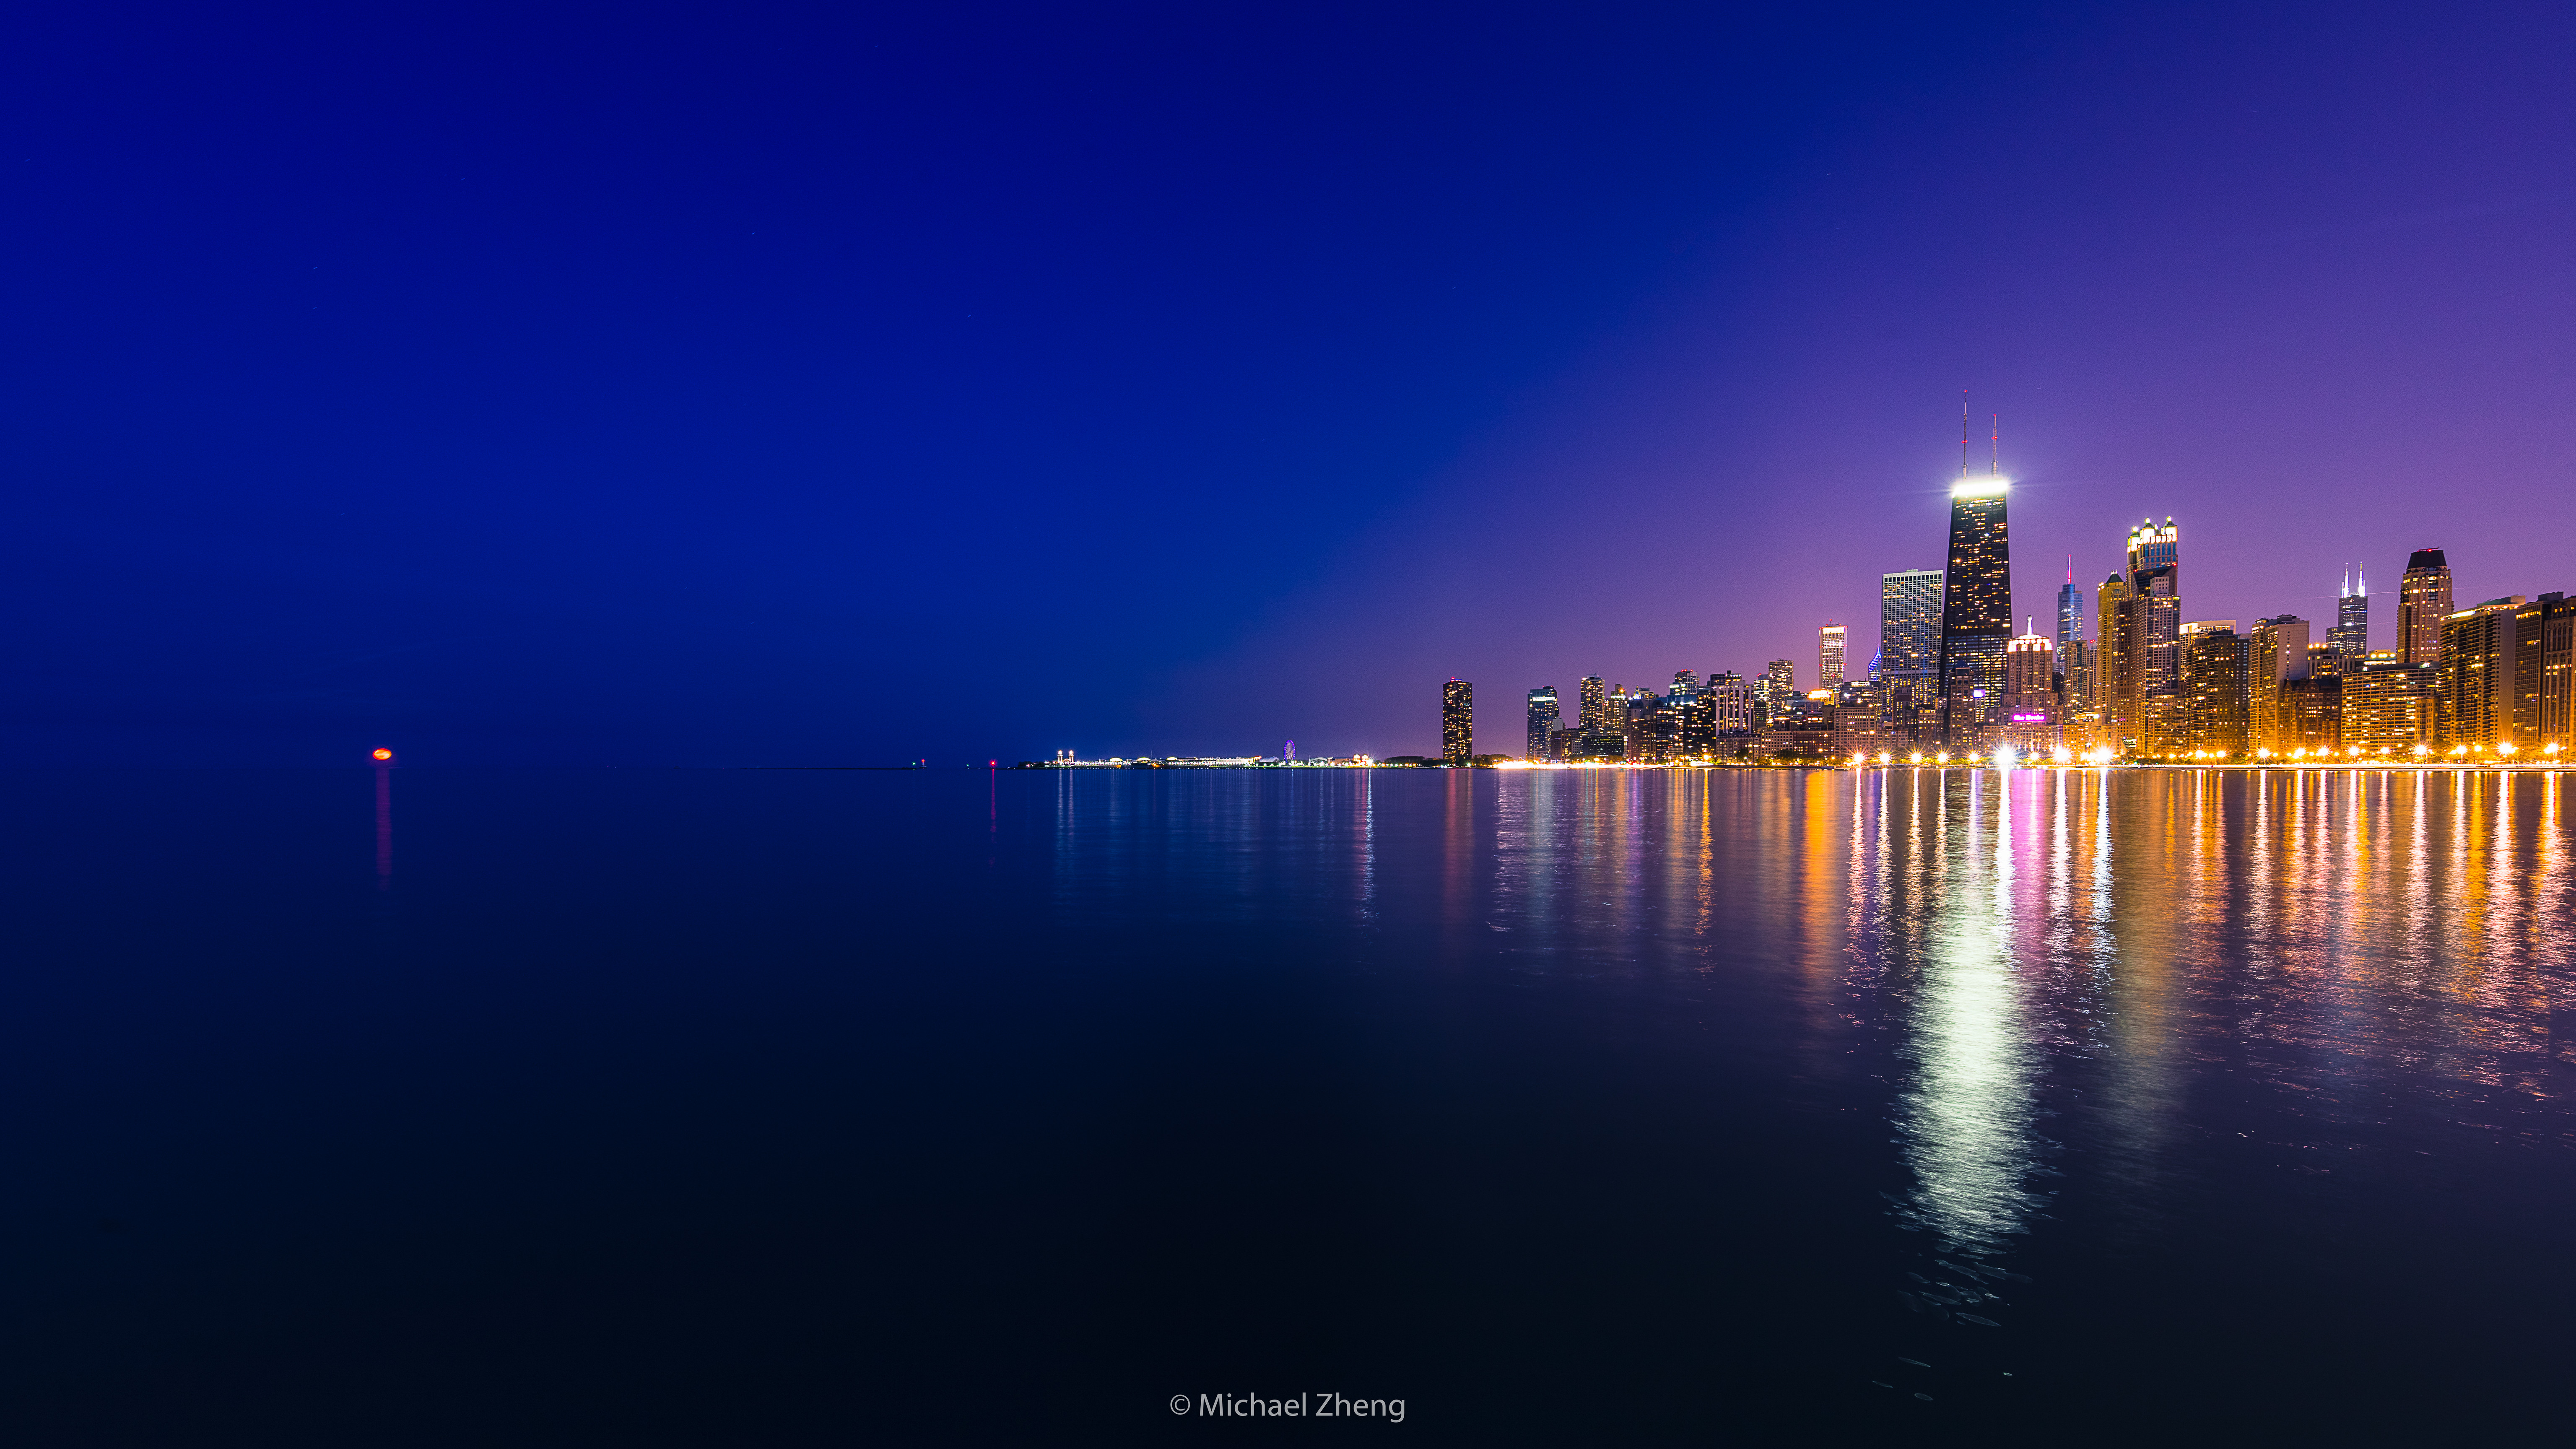 Chicago Photography Landscape City Night Water Reflection City Lights 6144x3456